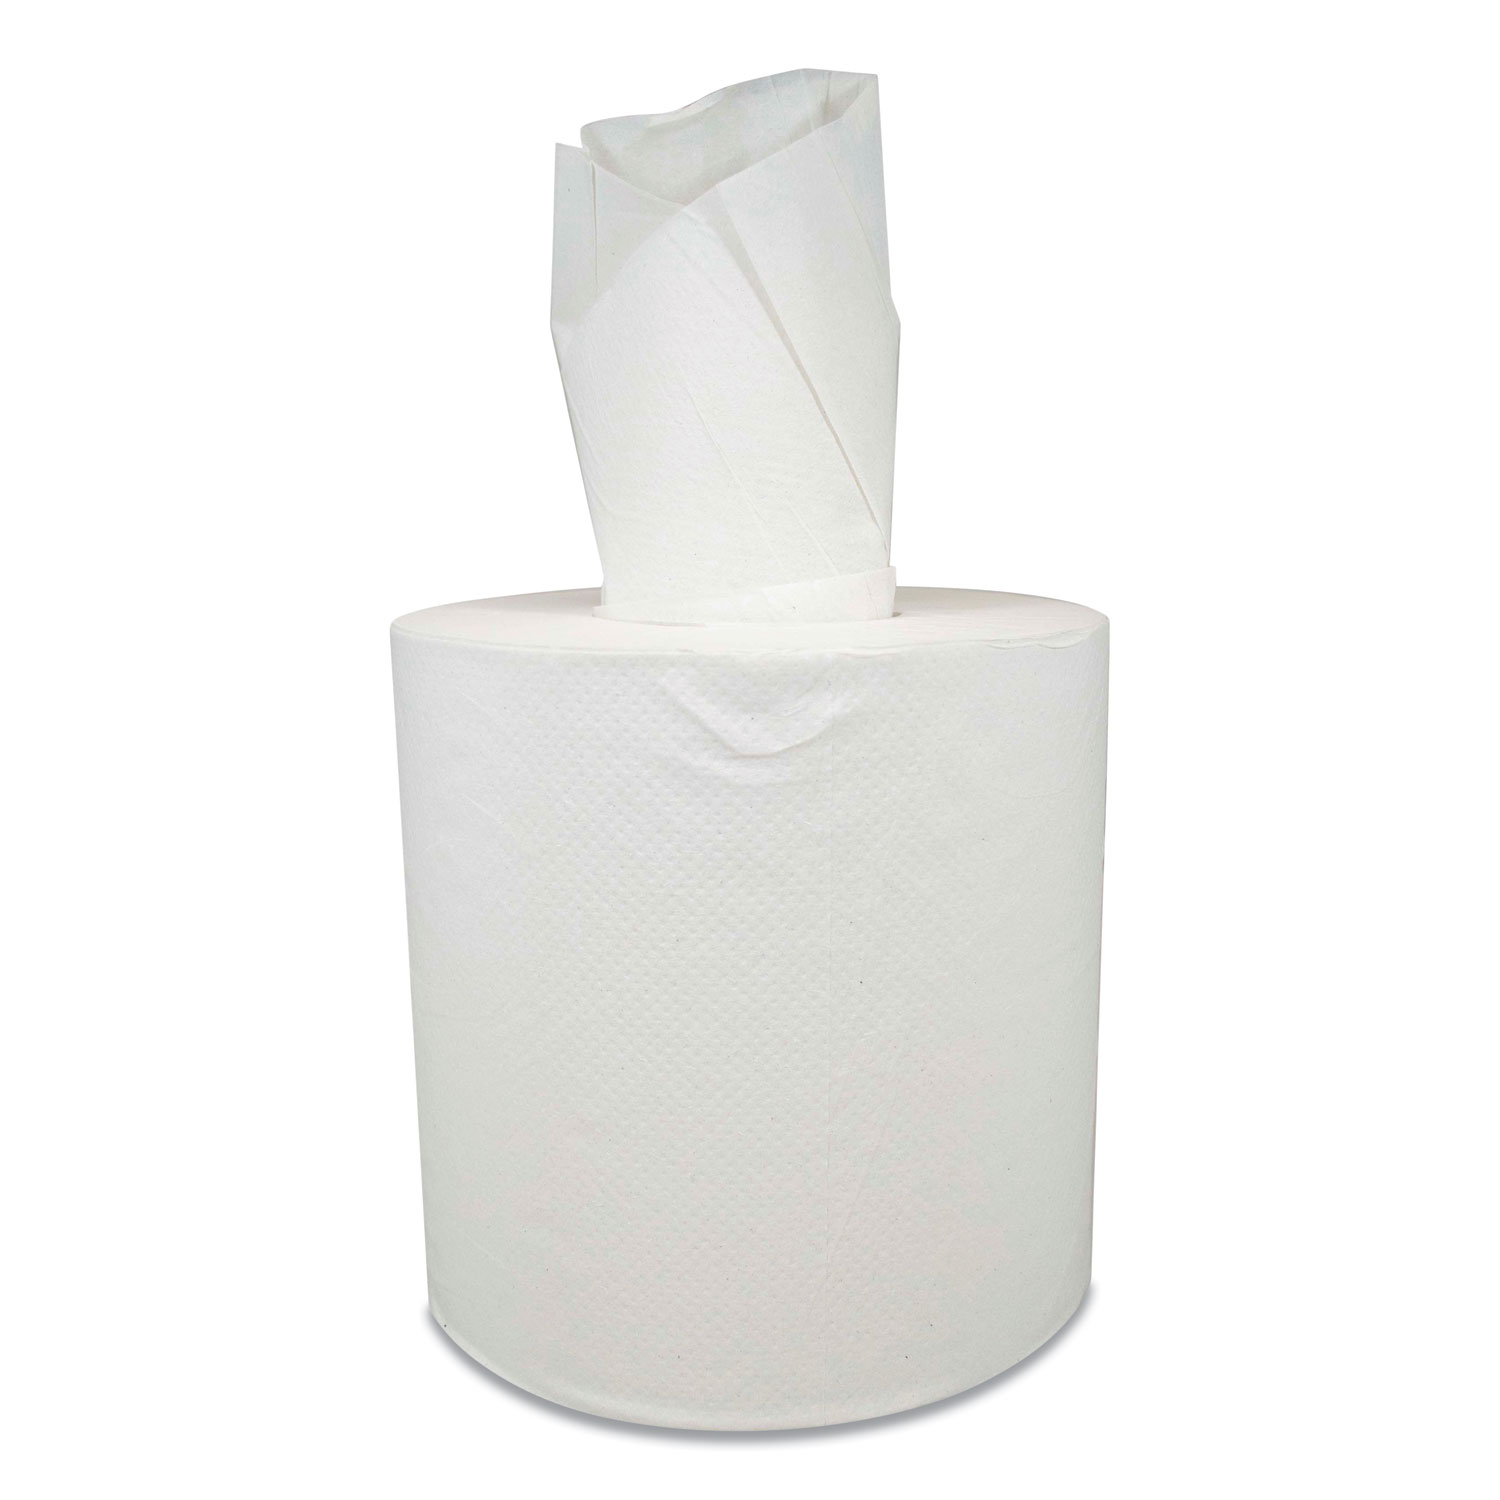  Morcon Tissue C5009 Morsoft Center-Pull Roll Towels, 2-Ply, 7.88 x 500 ft, 150/Roll, 6 Rolls/Carton (MORC5009) 